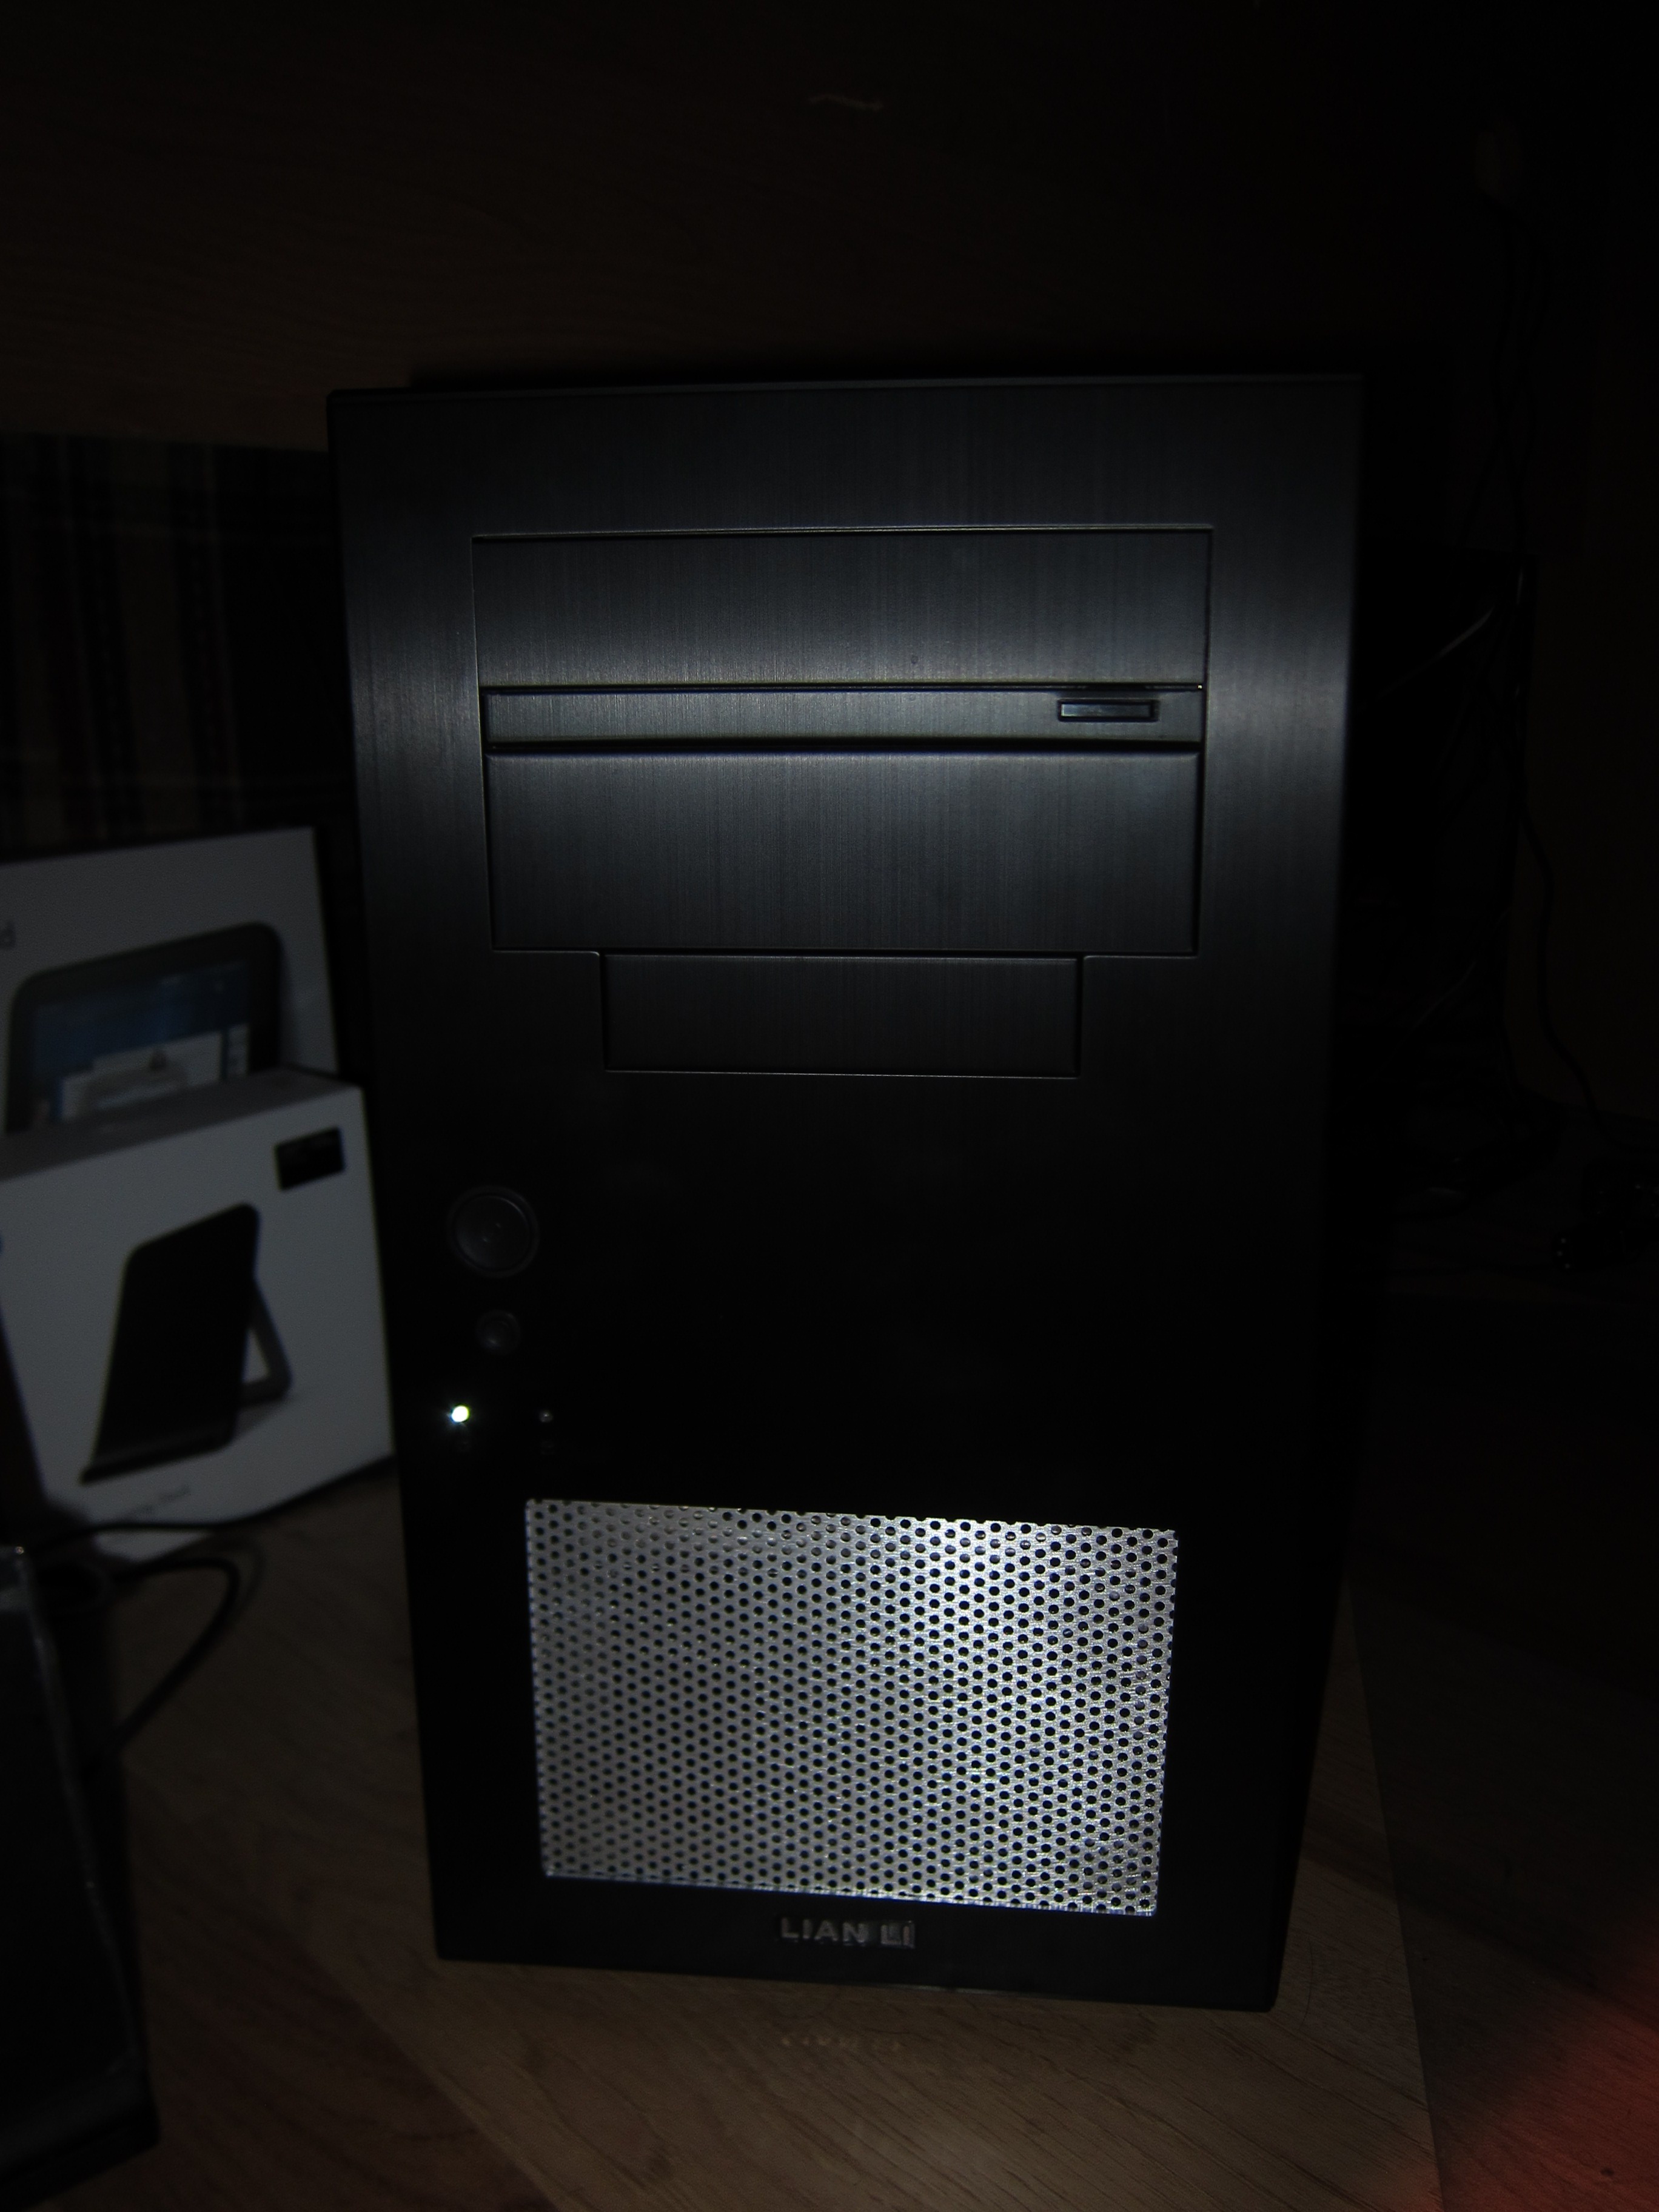 The front panel mounted on the case